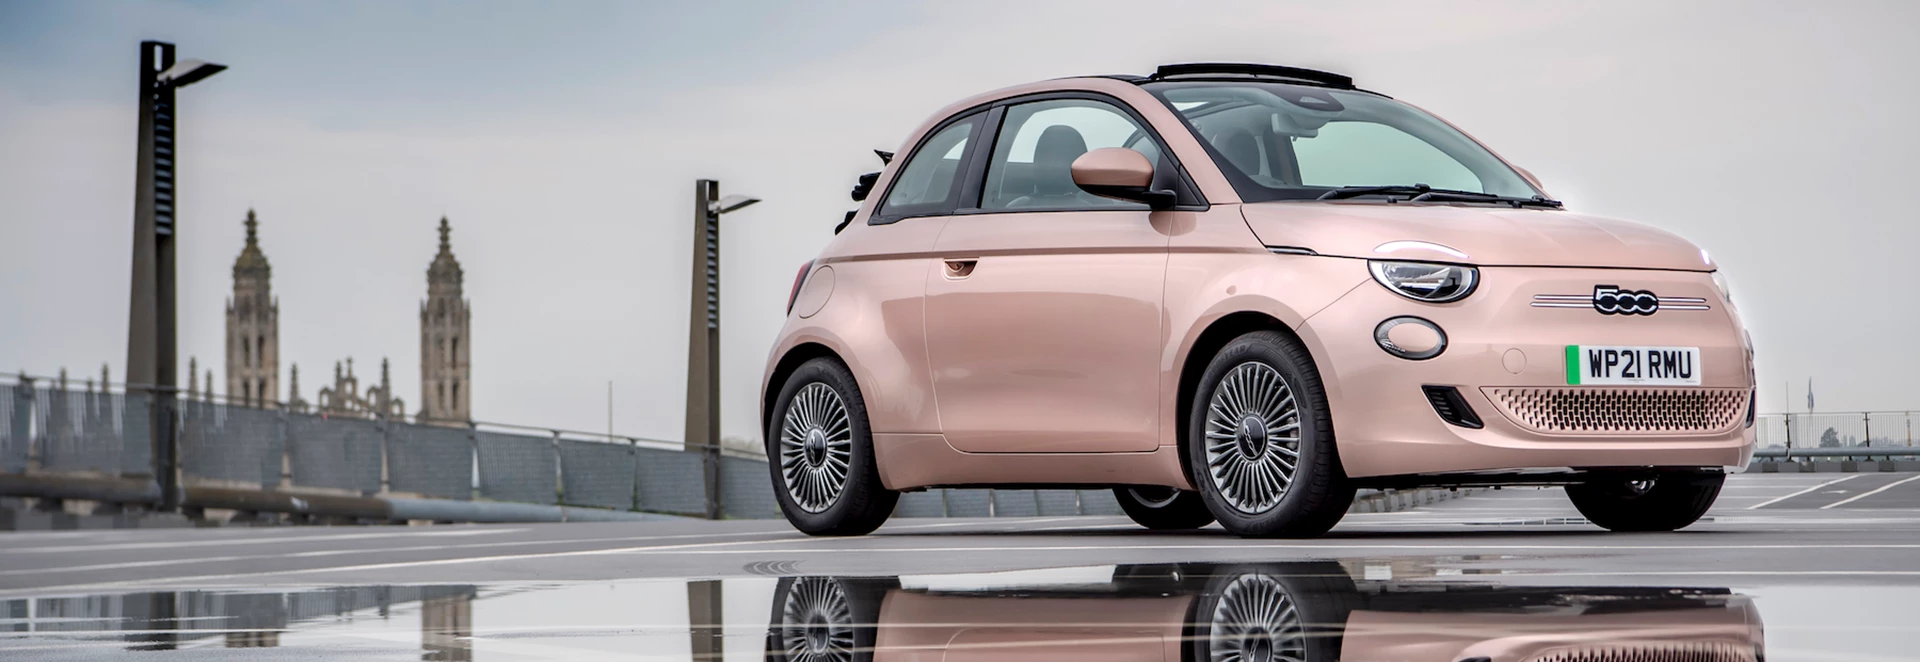 5 things you didn’t know about the new Fiat 500 electric 